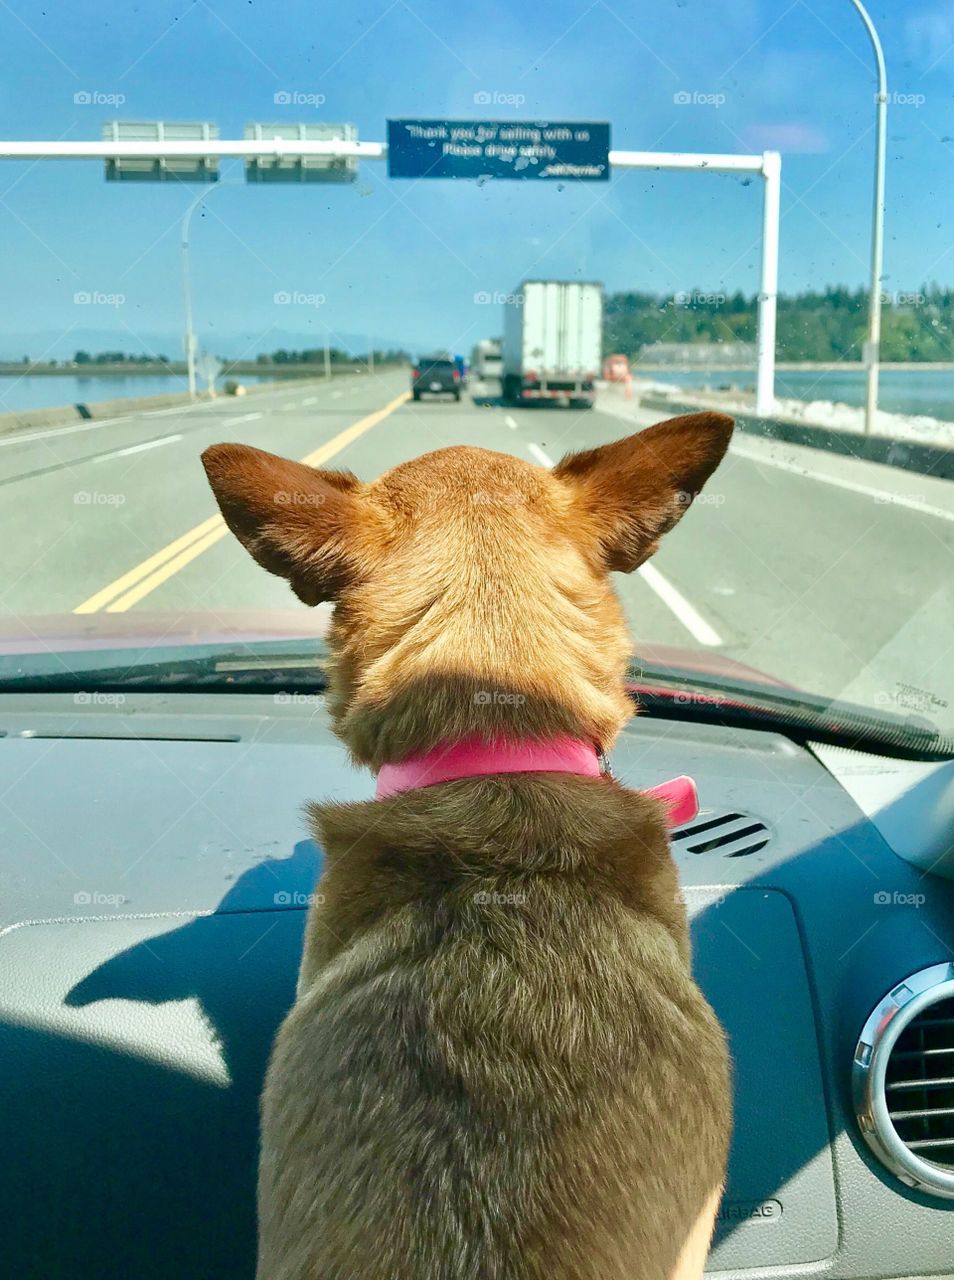 Dog heading out on vacation - looking out car window